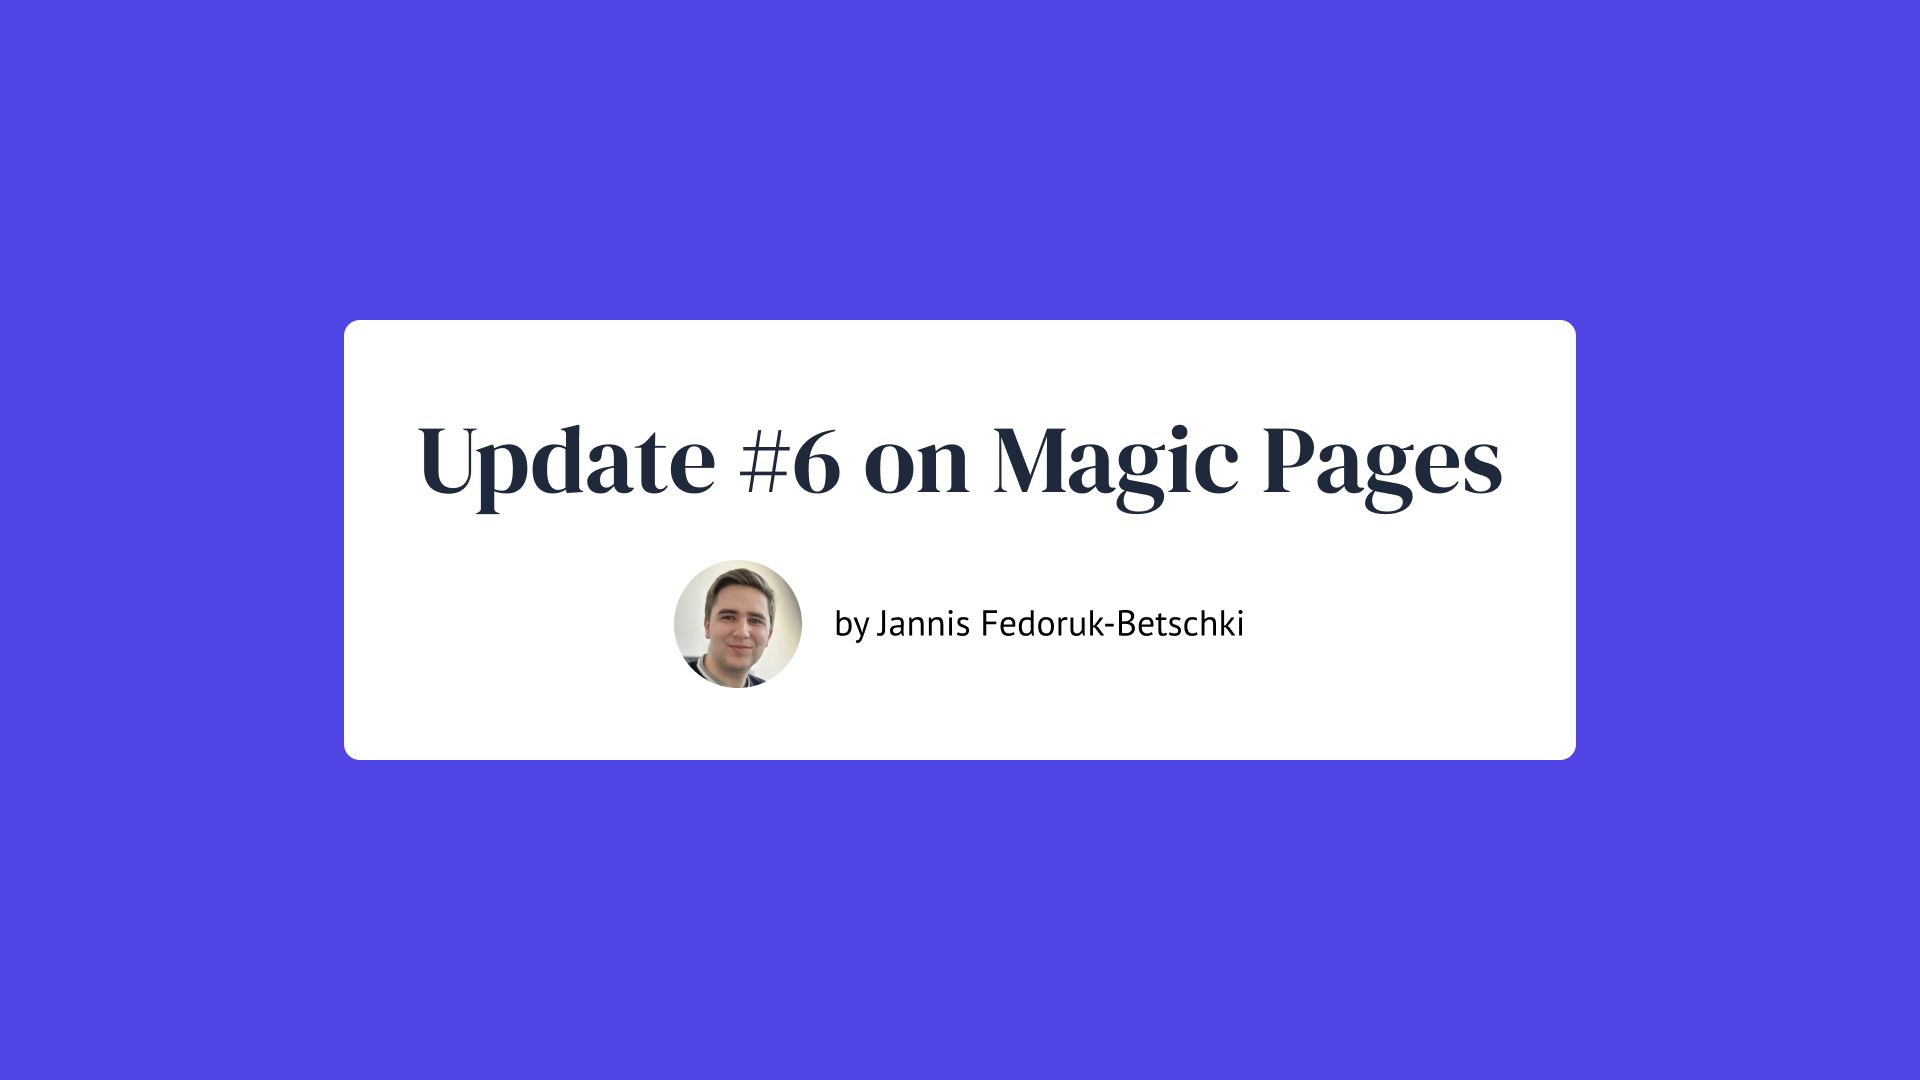 Update #6 on Magic Pages by Jannis Fedoruk-Betschki